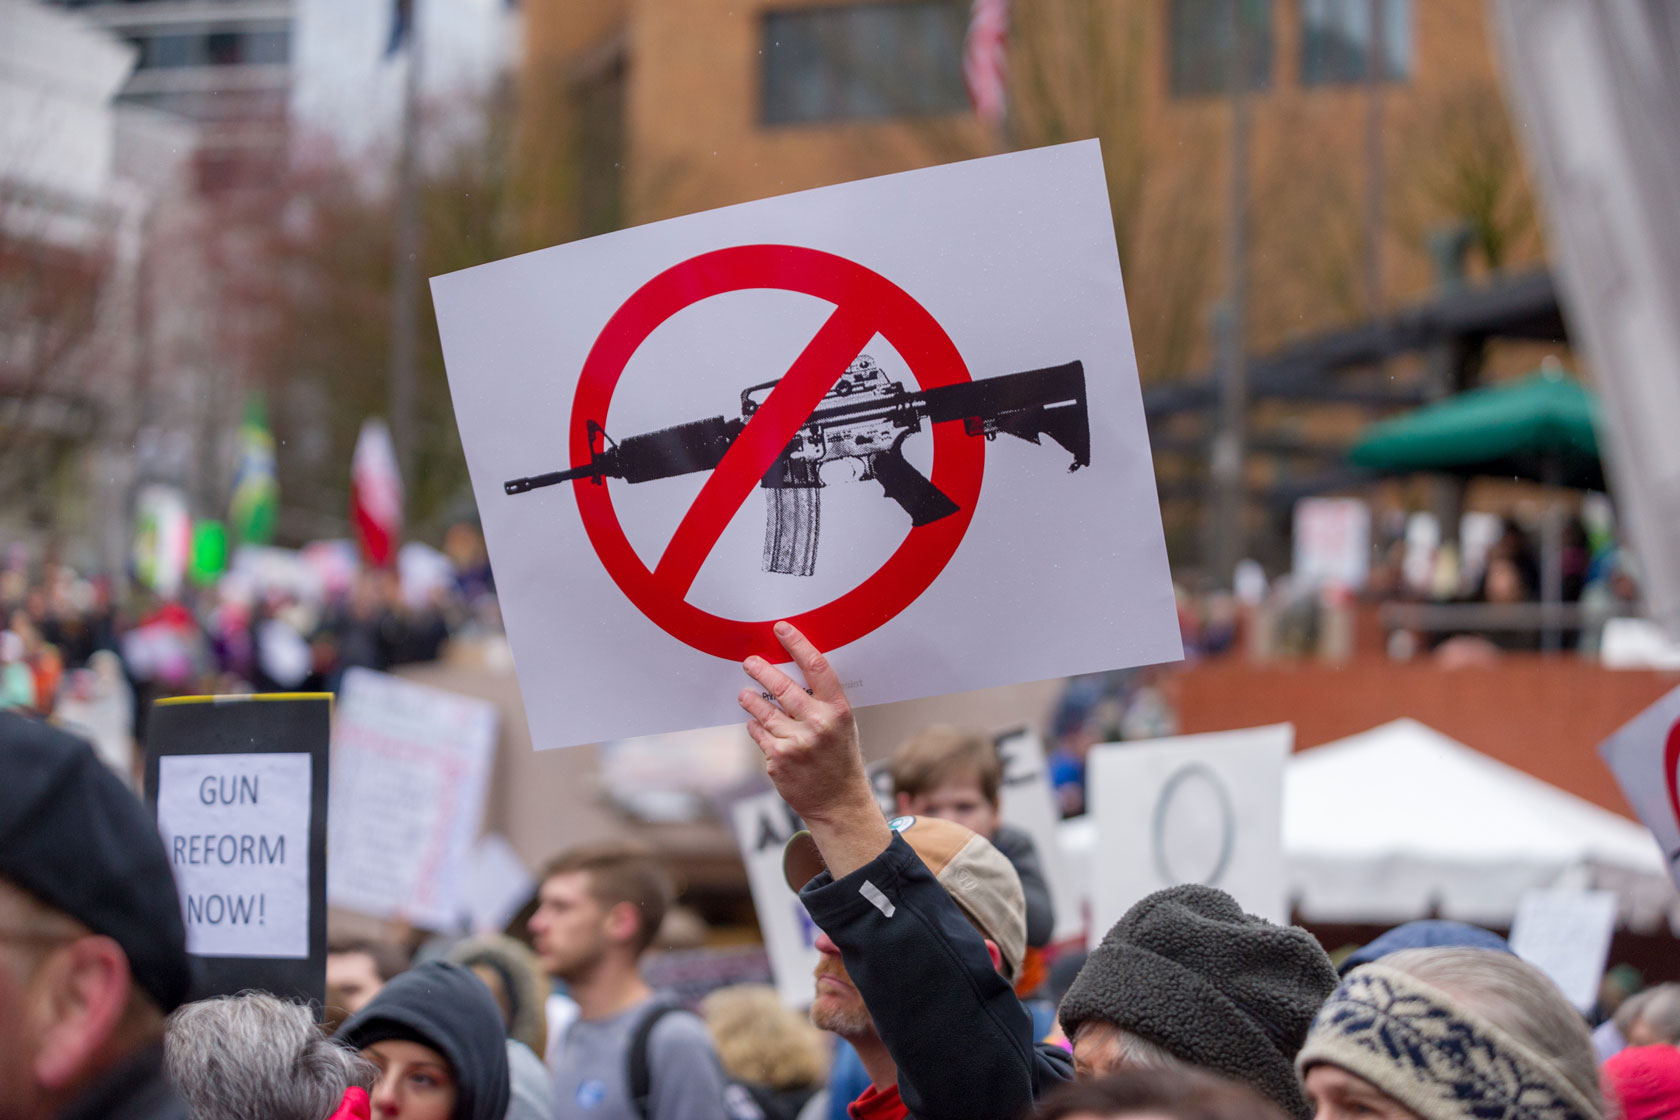 A demonstrator's sign is seen during the 